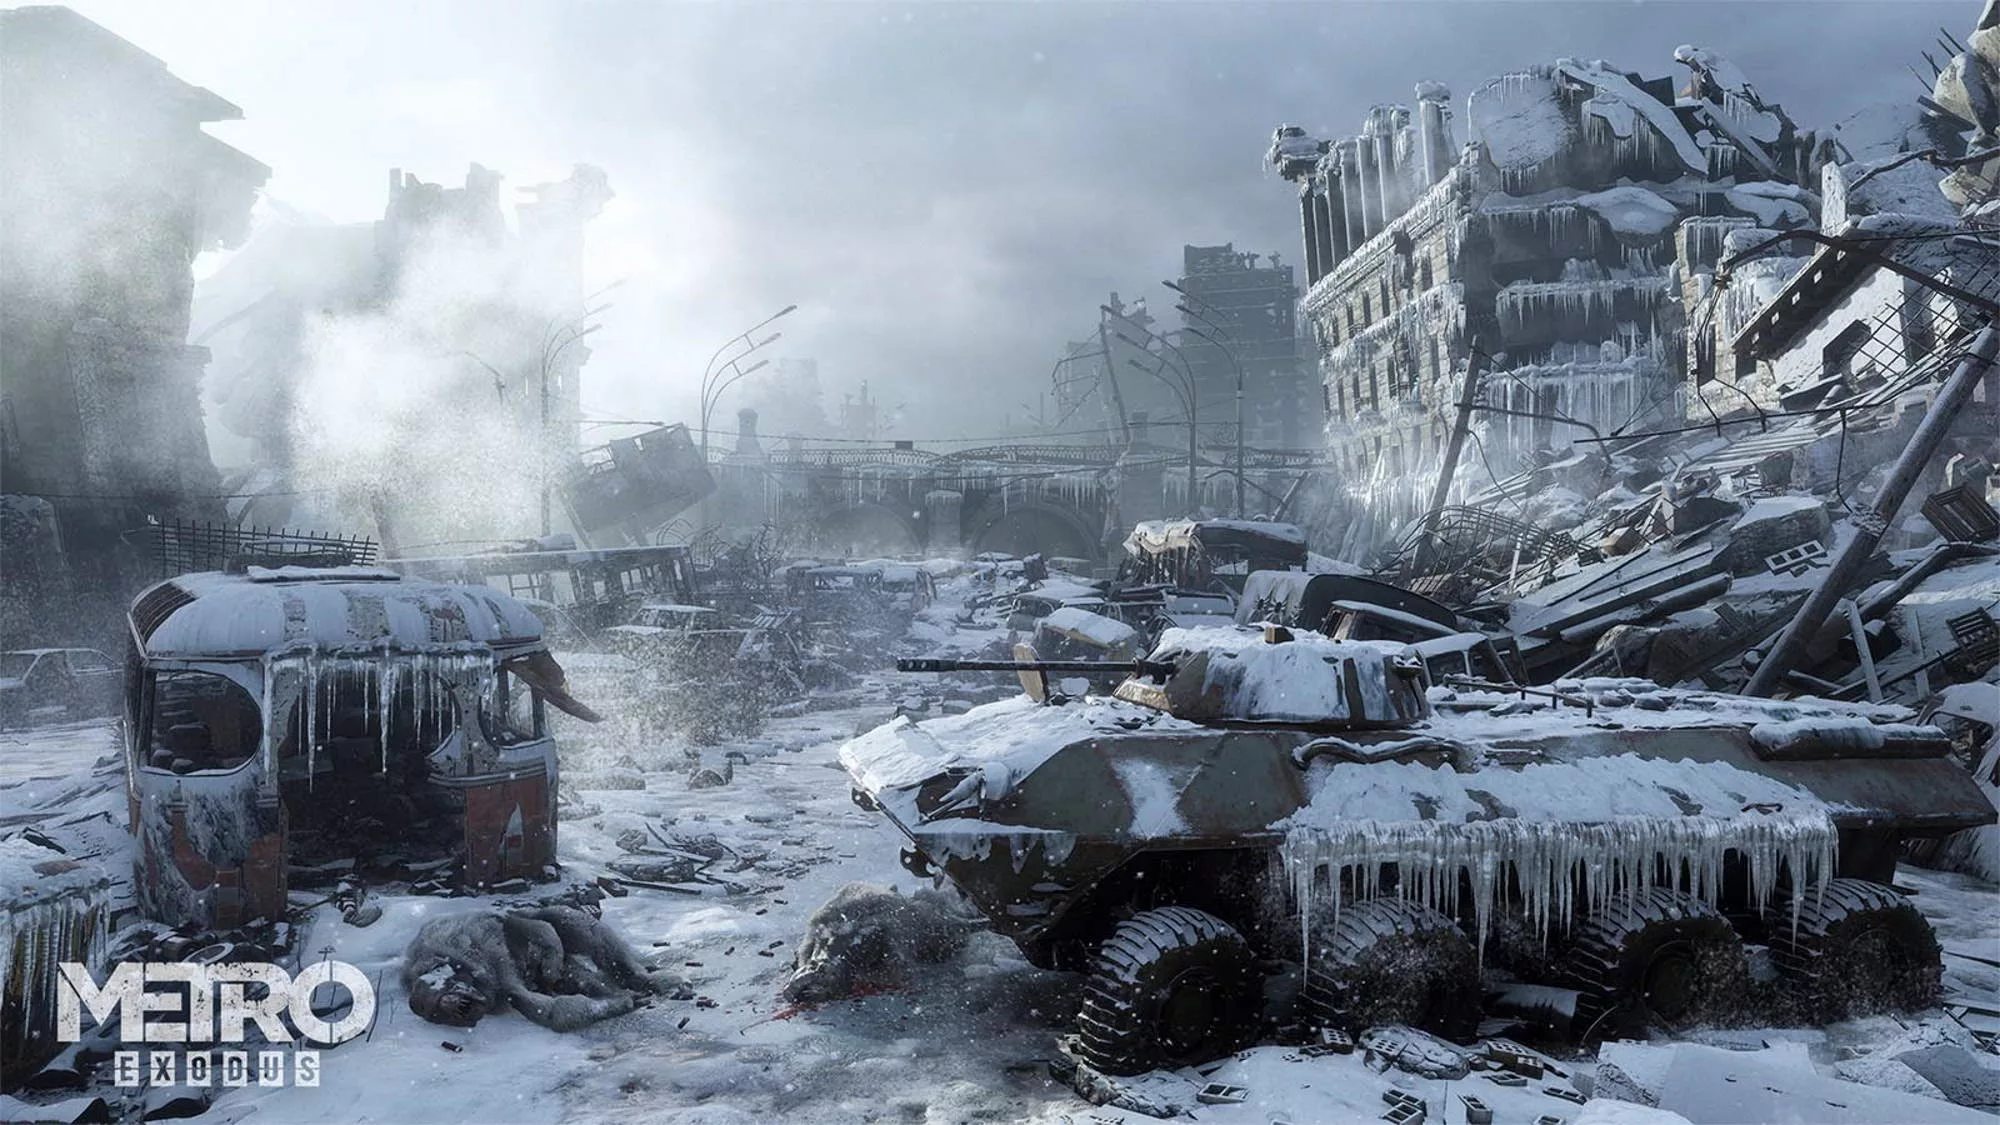 Frozen armoured personnel carrier and train in the ruins of a city.